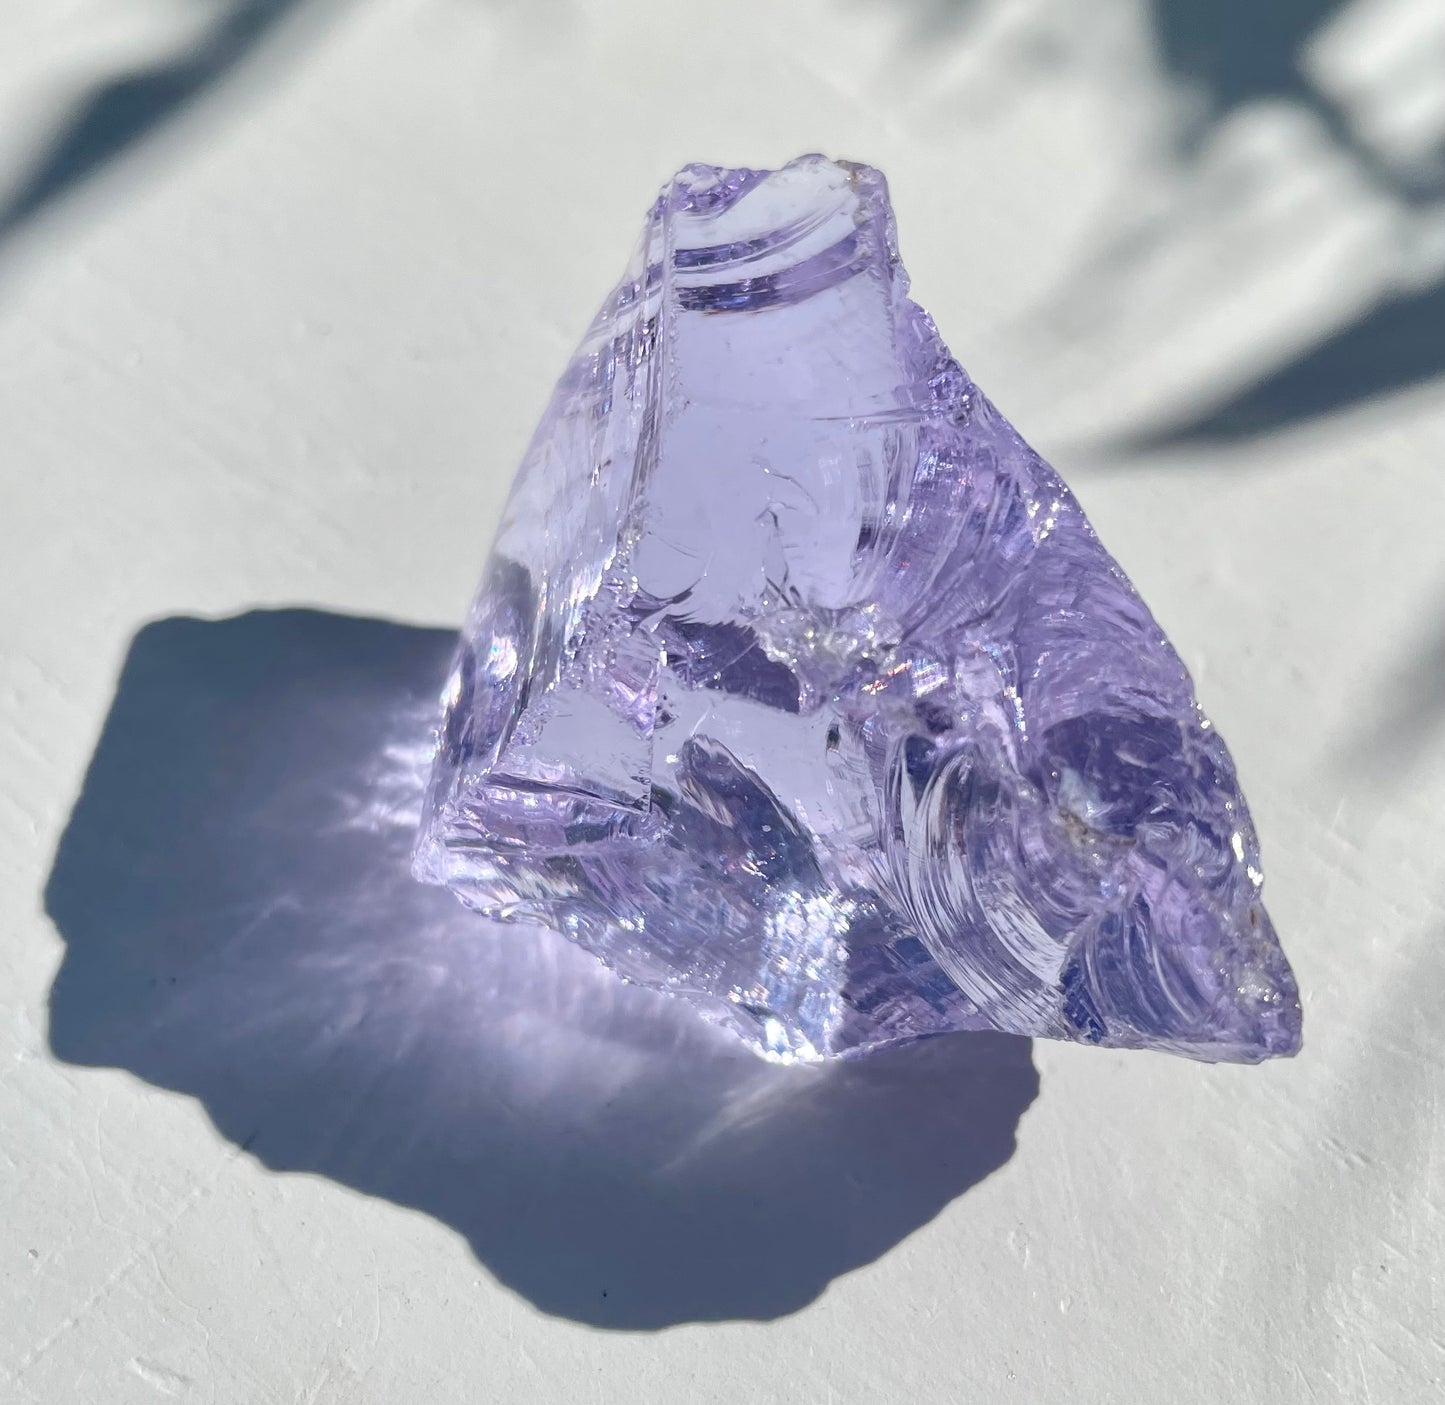 ANDARA Ascended Lilac 46 g ~ mineral etherium